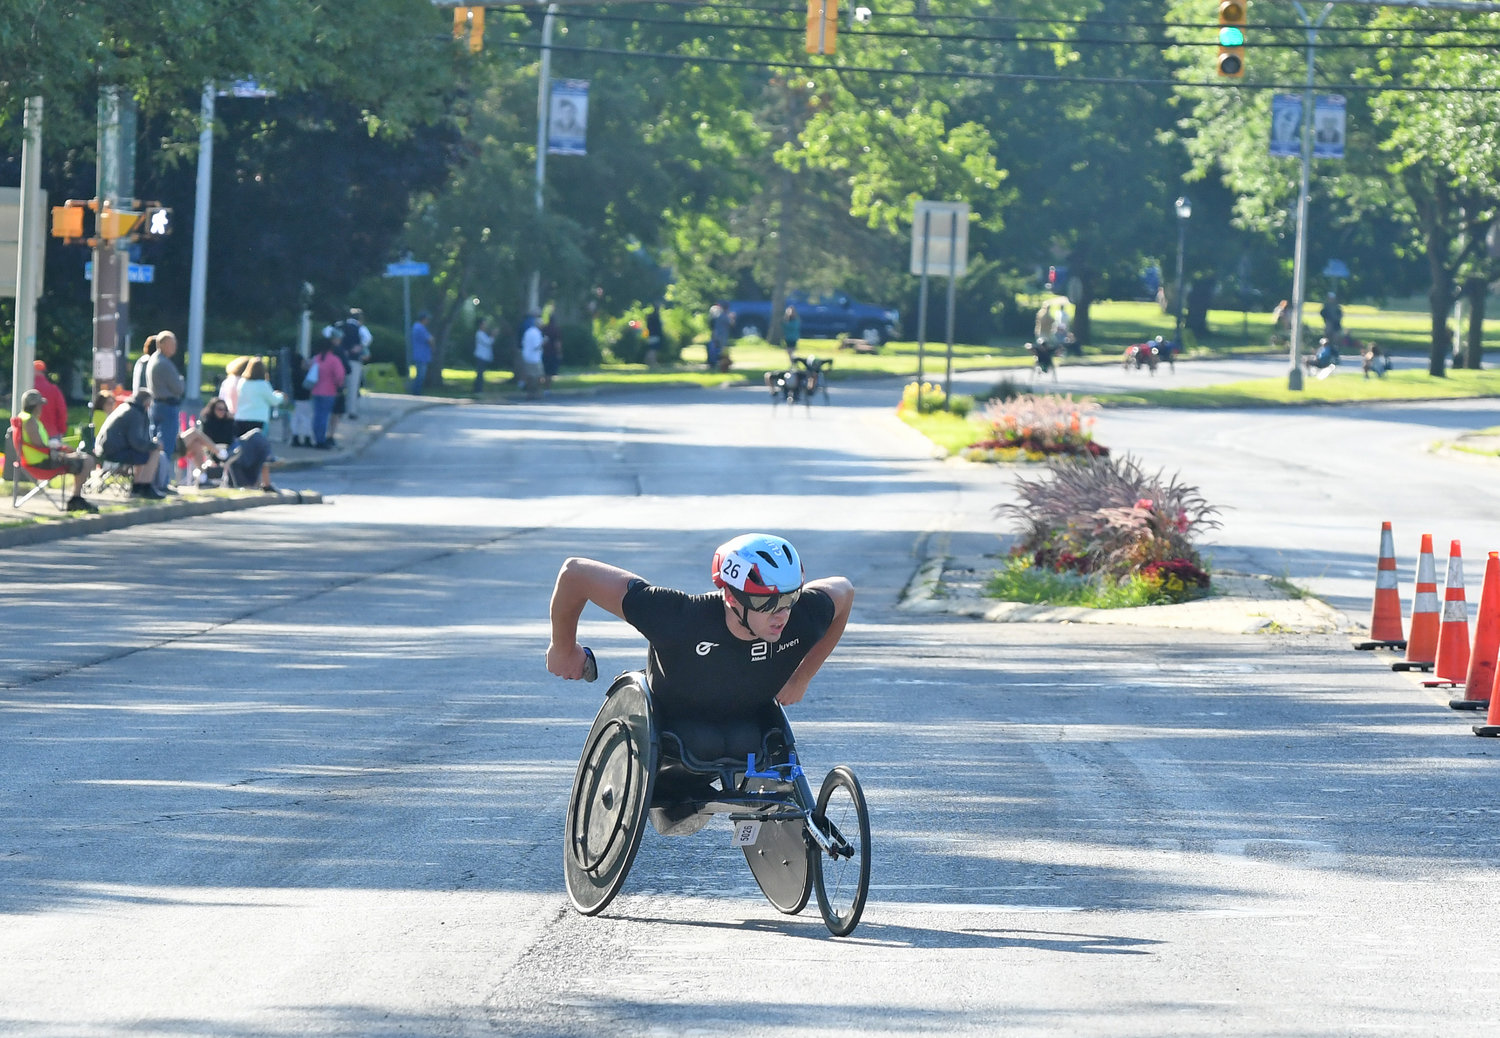 The first wheelchair racer of the 45th Boilermaker Road Race to make the turn left from Memorial Parkway to Valley View Road was eventual winner Daniel Romanchuk. It was his fifth win in the Utica race.